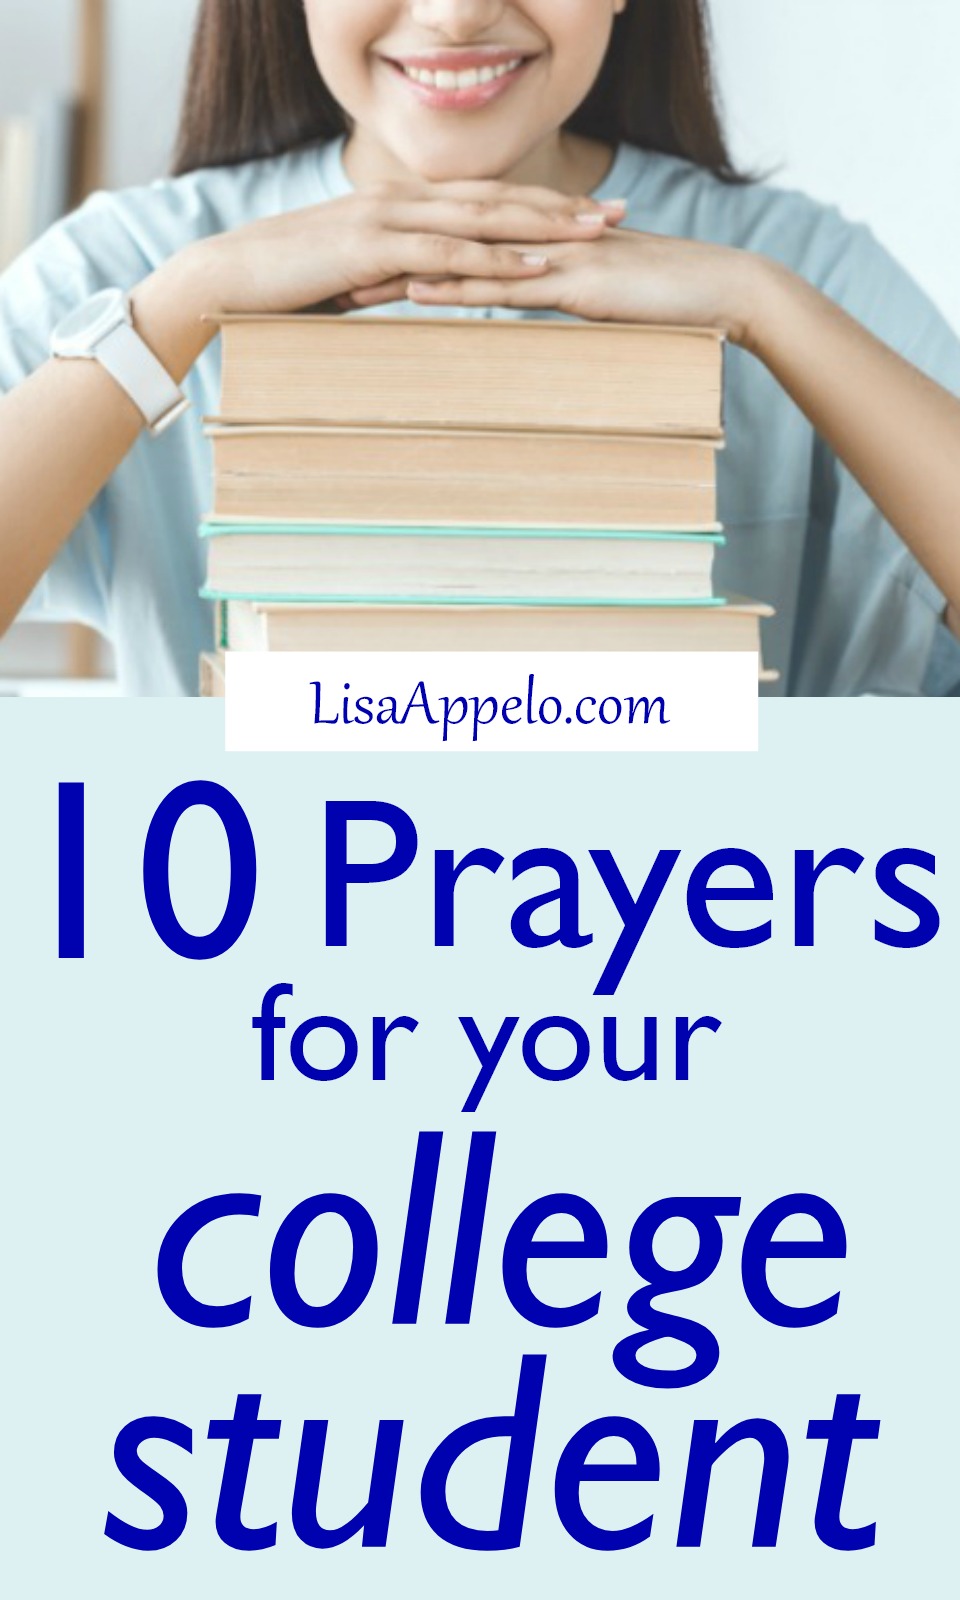 10 Prayers for Your College Student